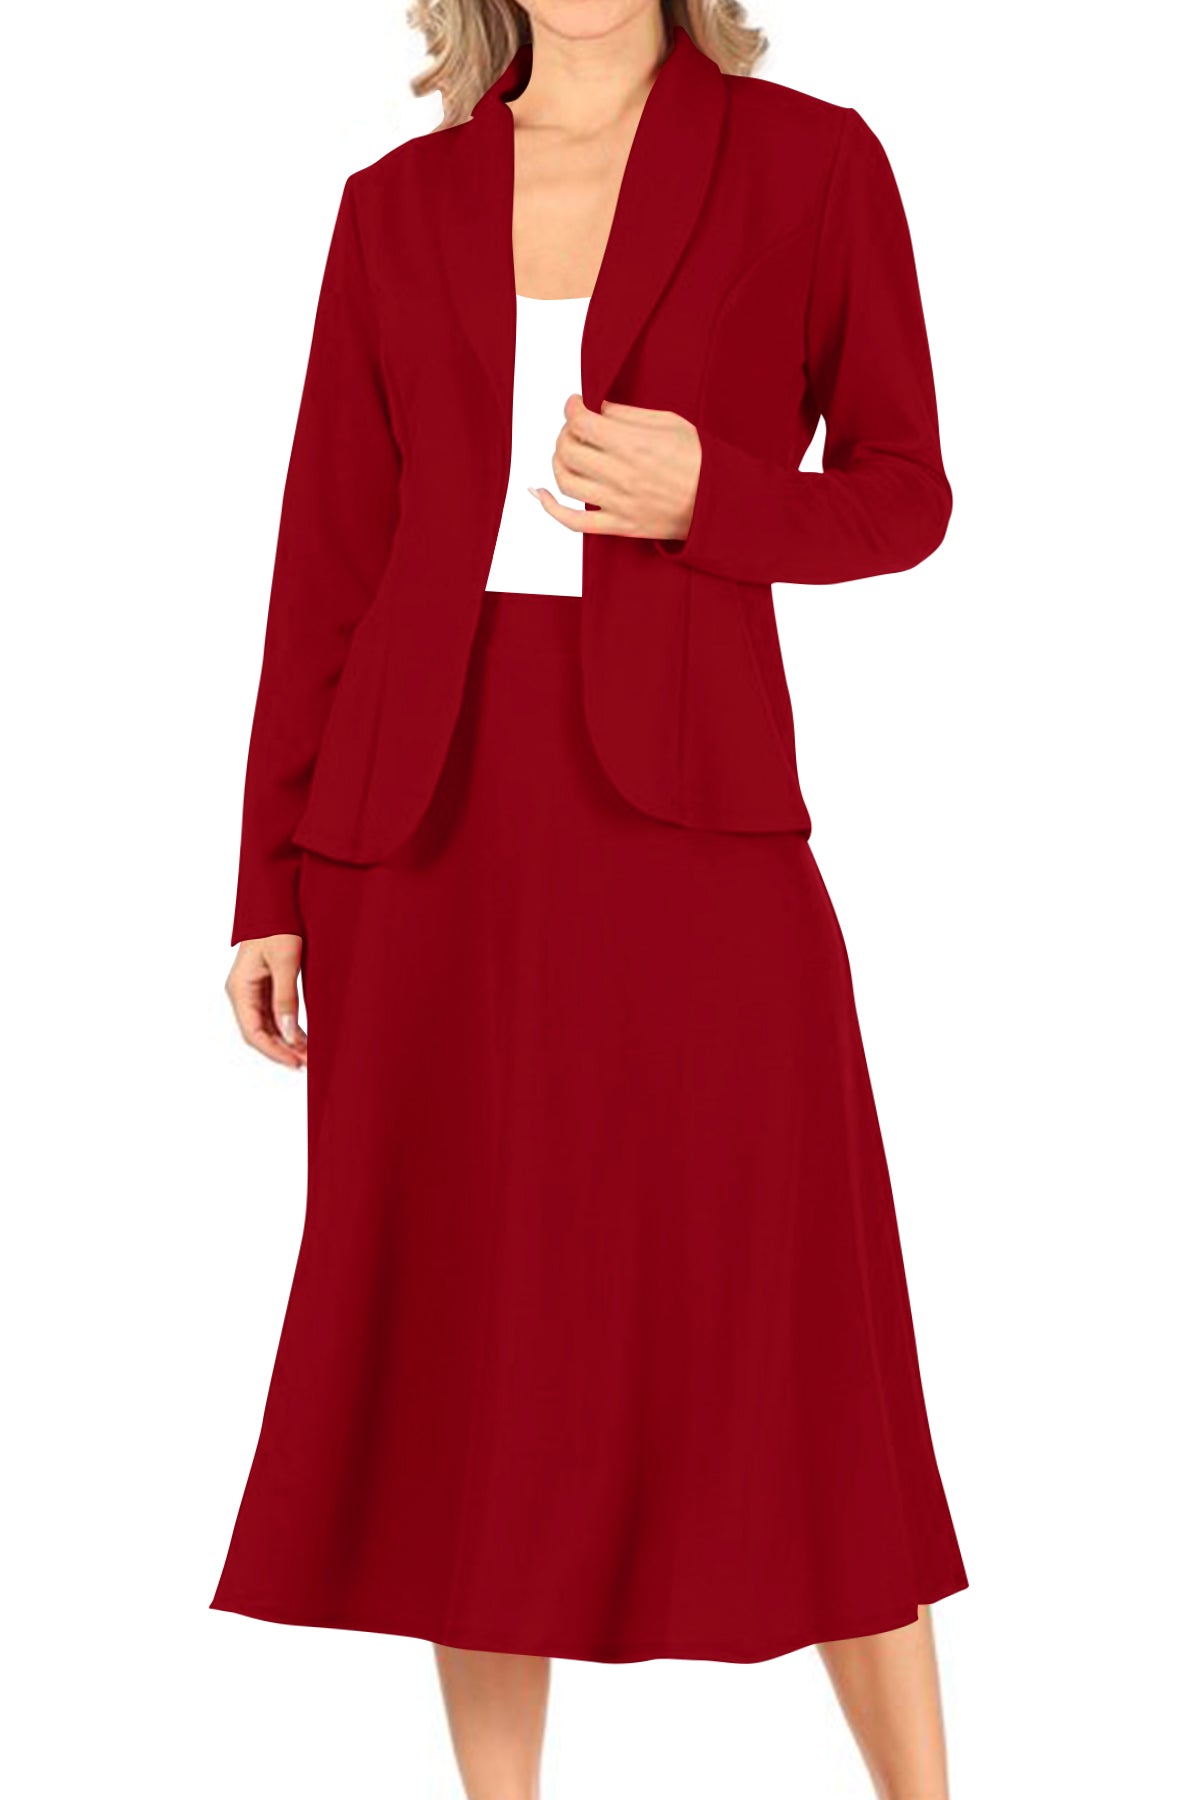 Women's Two Piece Lightweight Solid Long Sleeve Casual Blazer Relaxed A-Line Midi Skirt